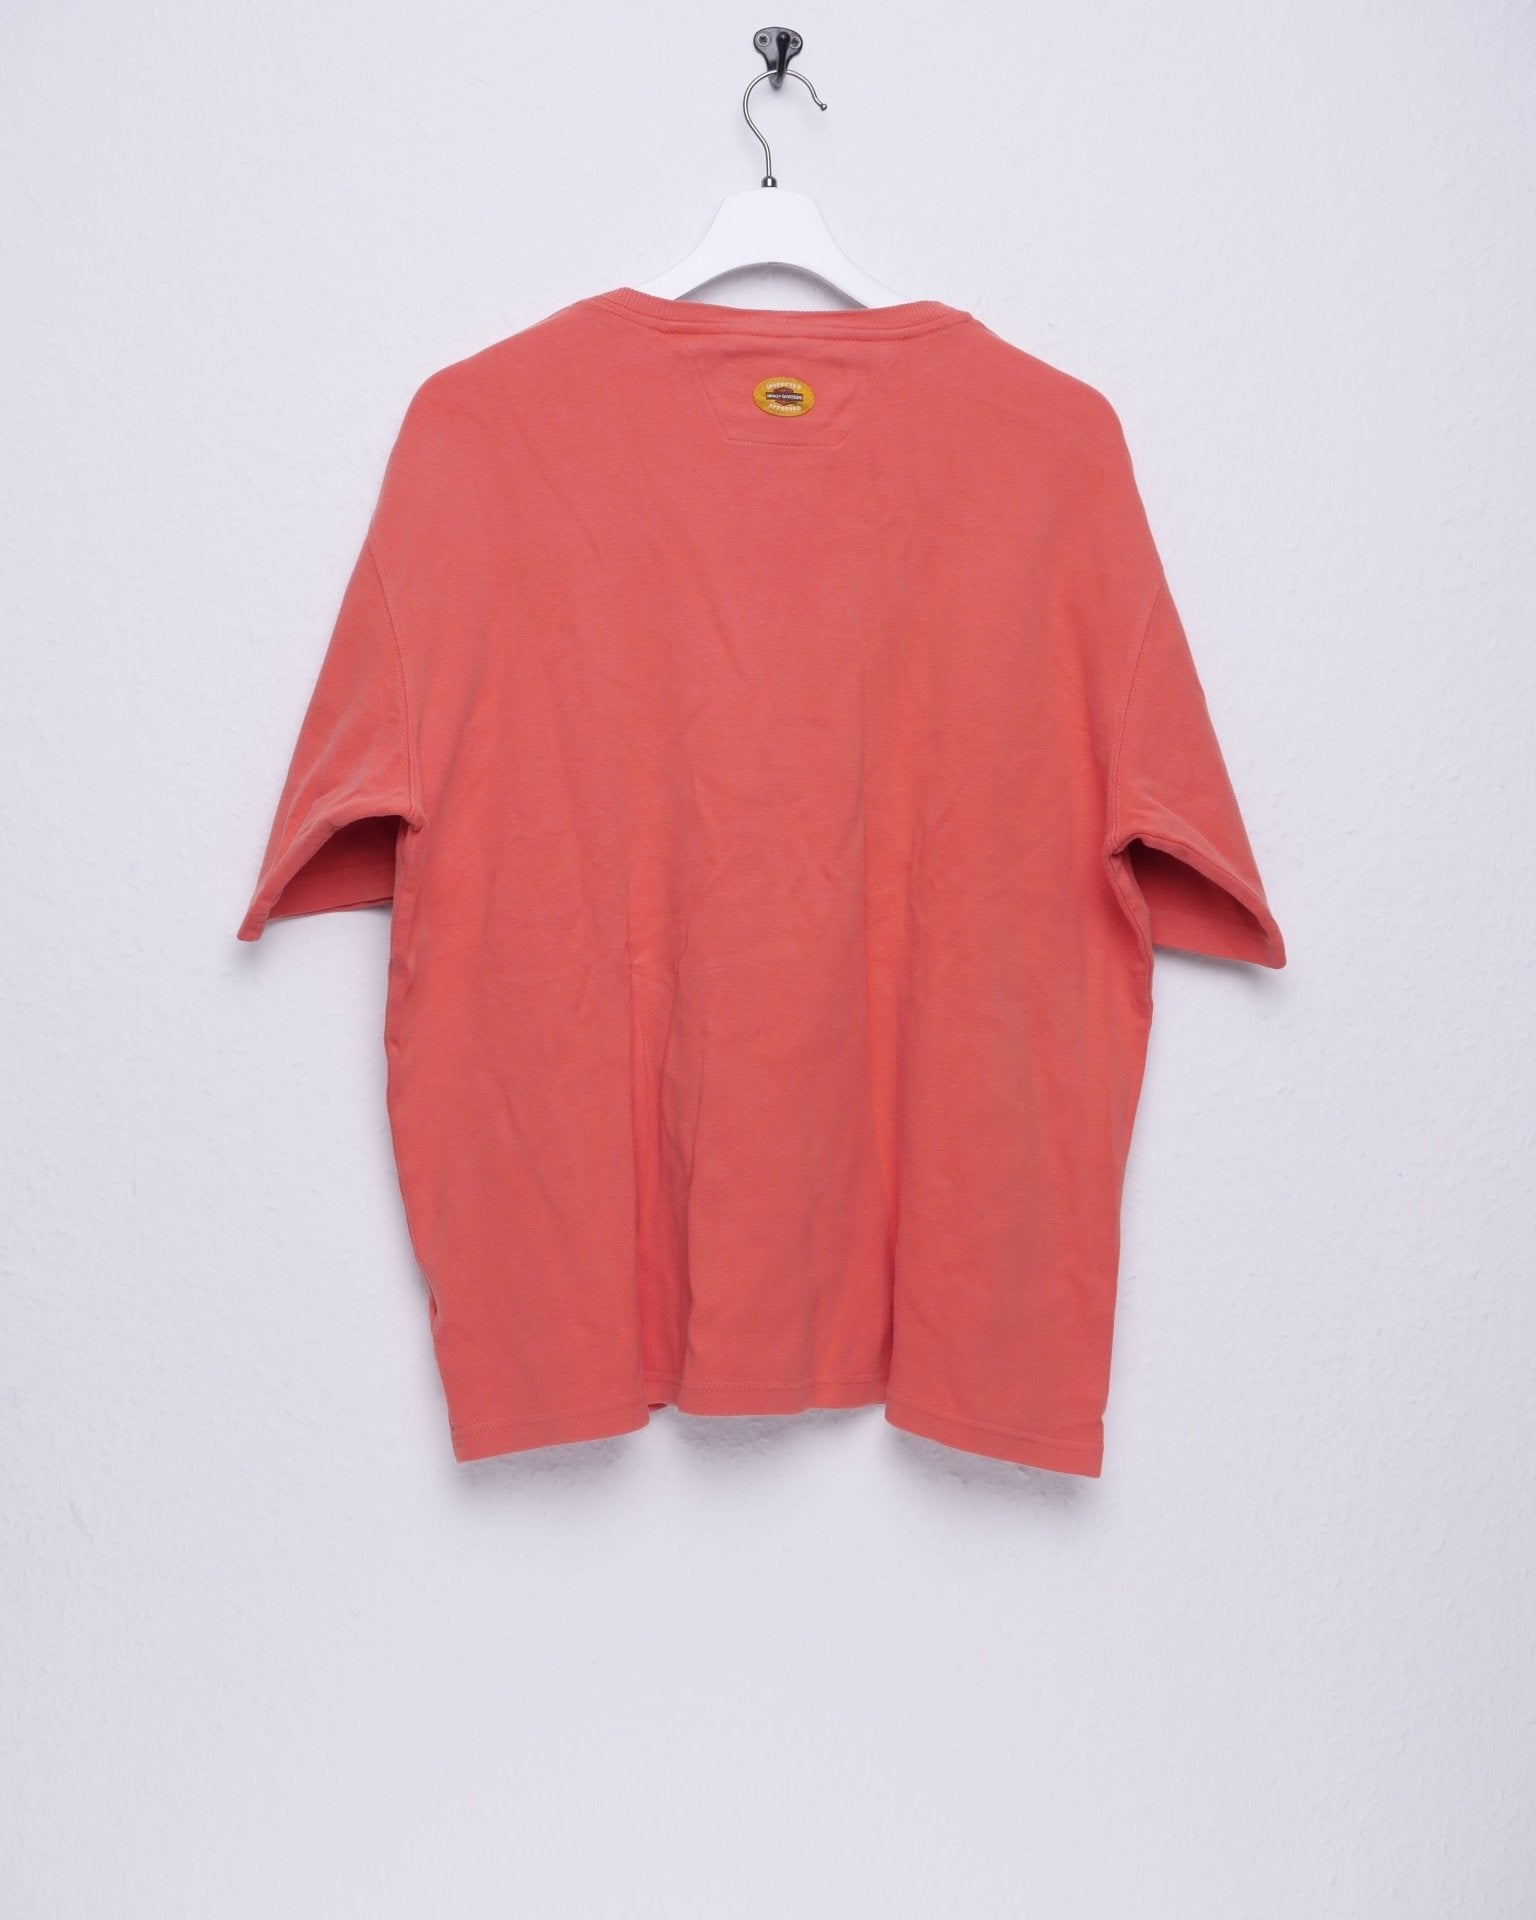 harley embroidered Patch orange Shirt - Peeces